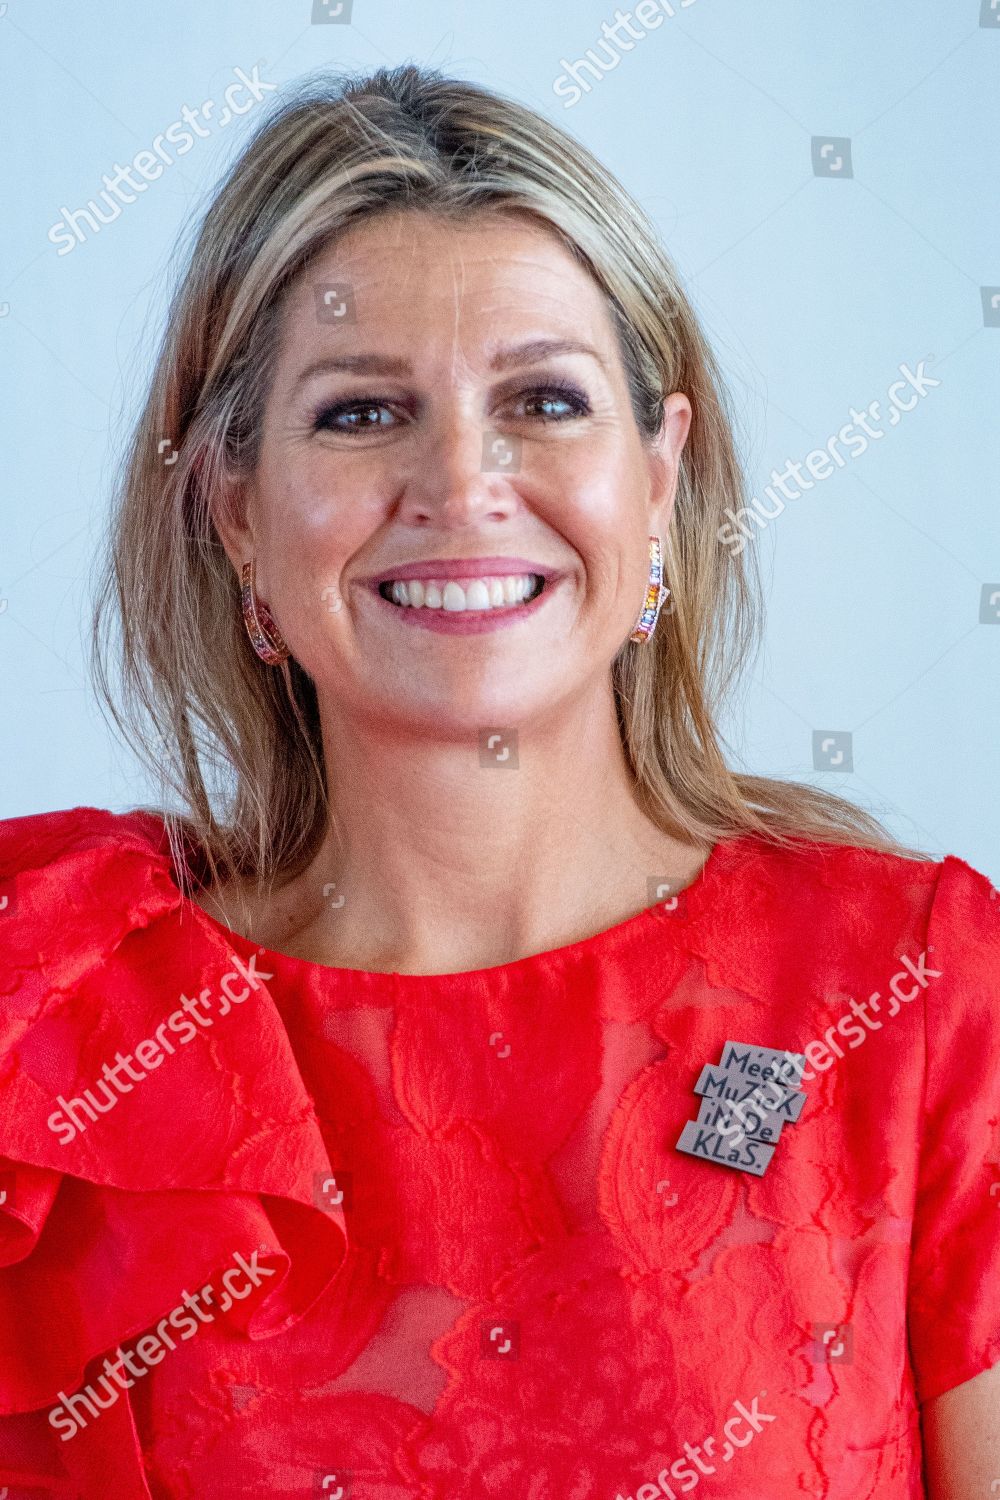 queen-maxima-signing-the-more-music-covenant-in-the-classroom-drenthe-the-netherlands-shutterstock-editorial-10317631s.jpg